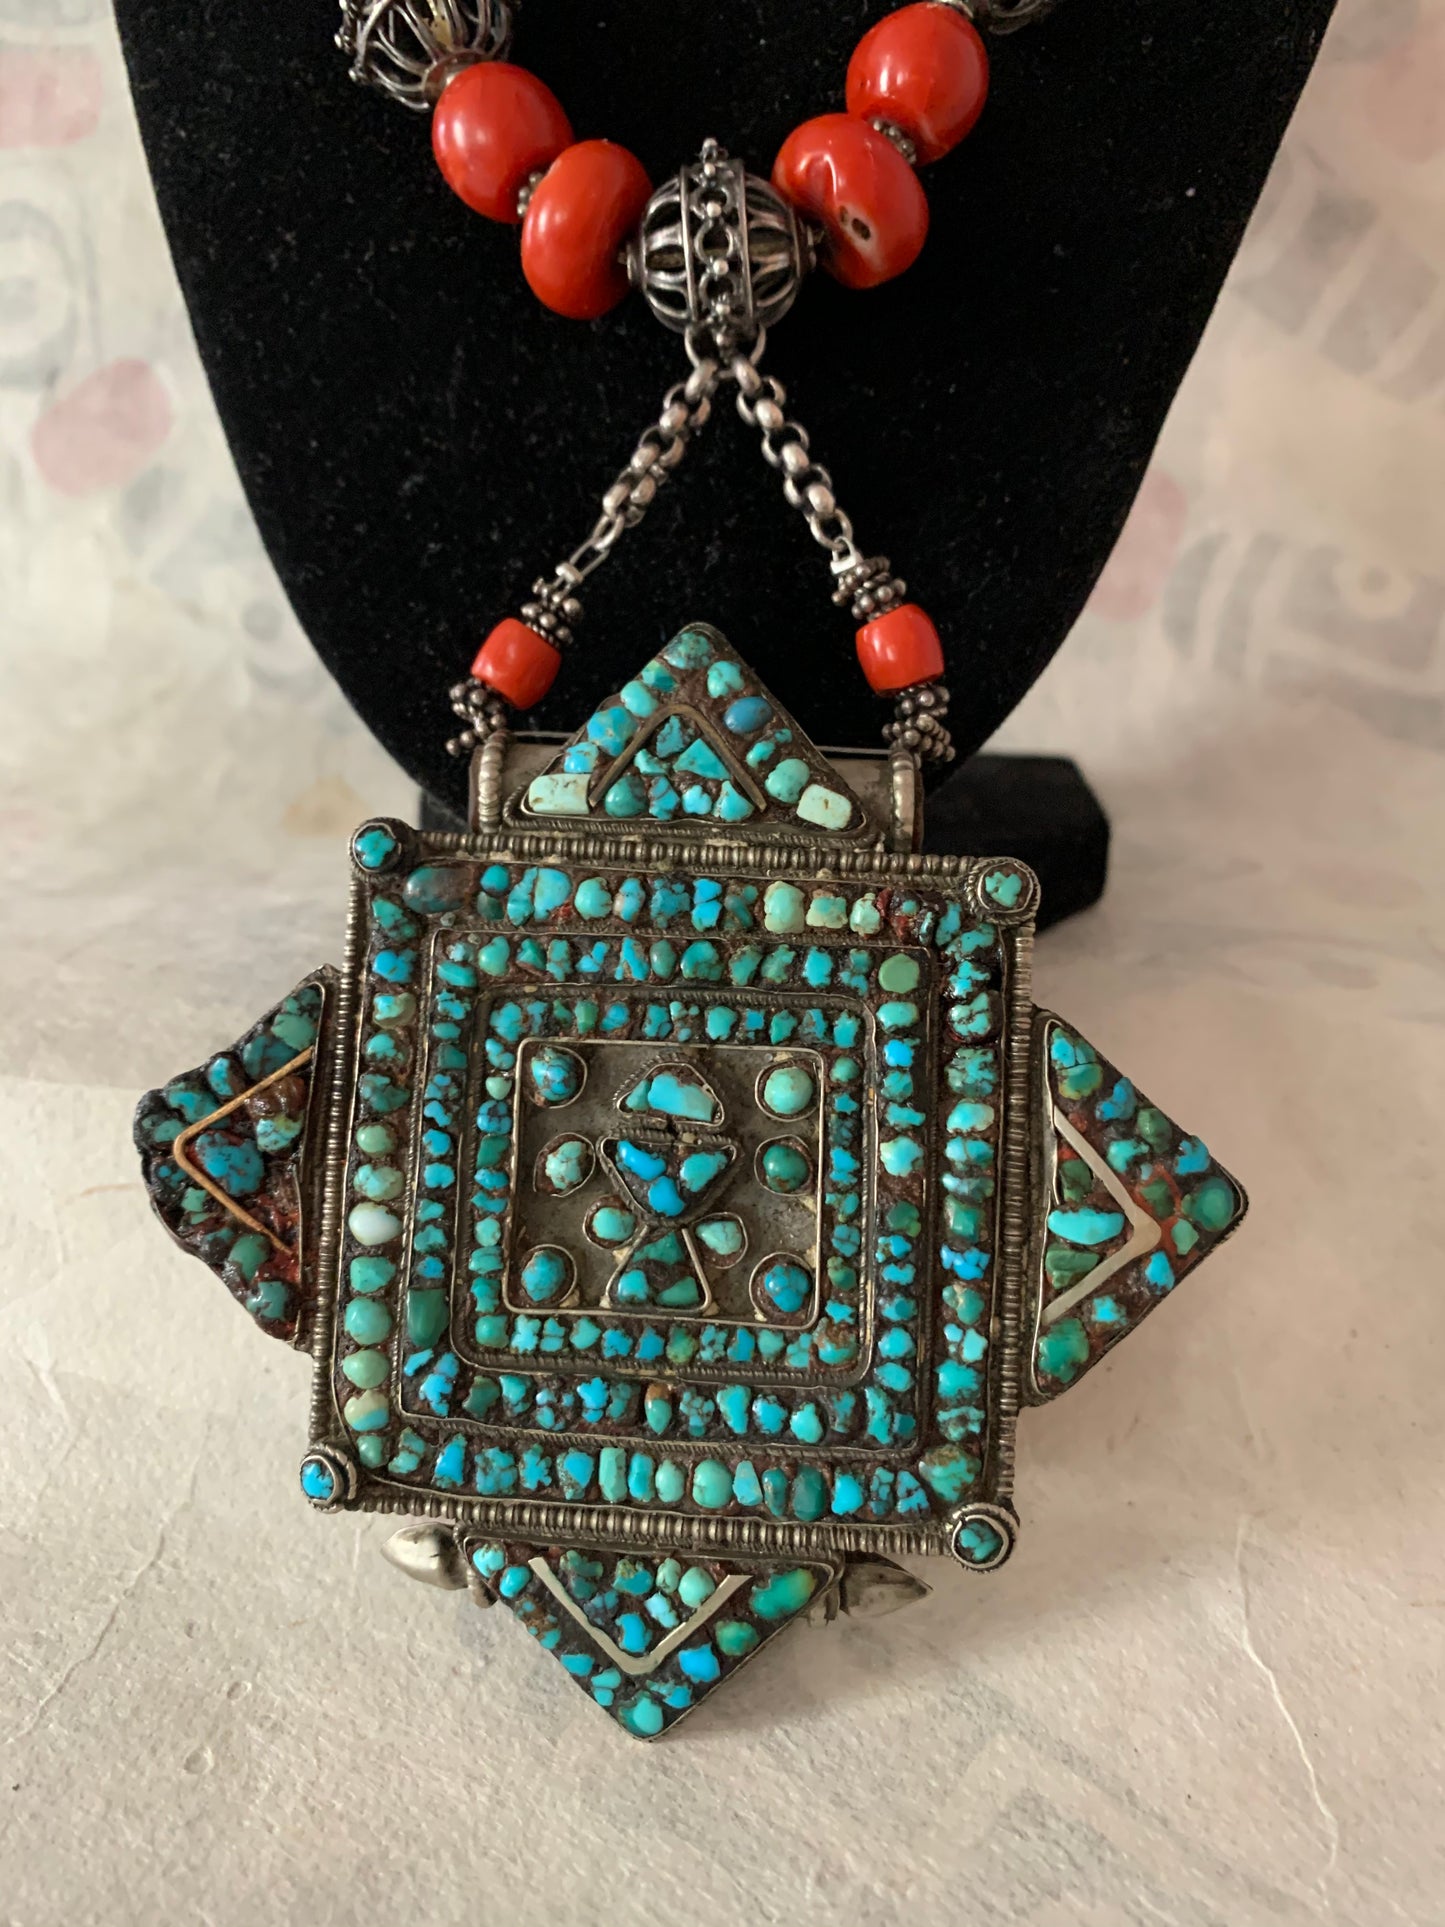 A vintage Tibetan silver and turquoise ghau pendant with an antique red coral bead and silver bead necklace